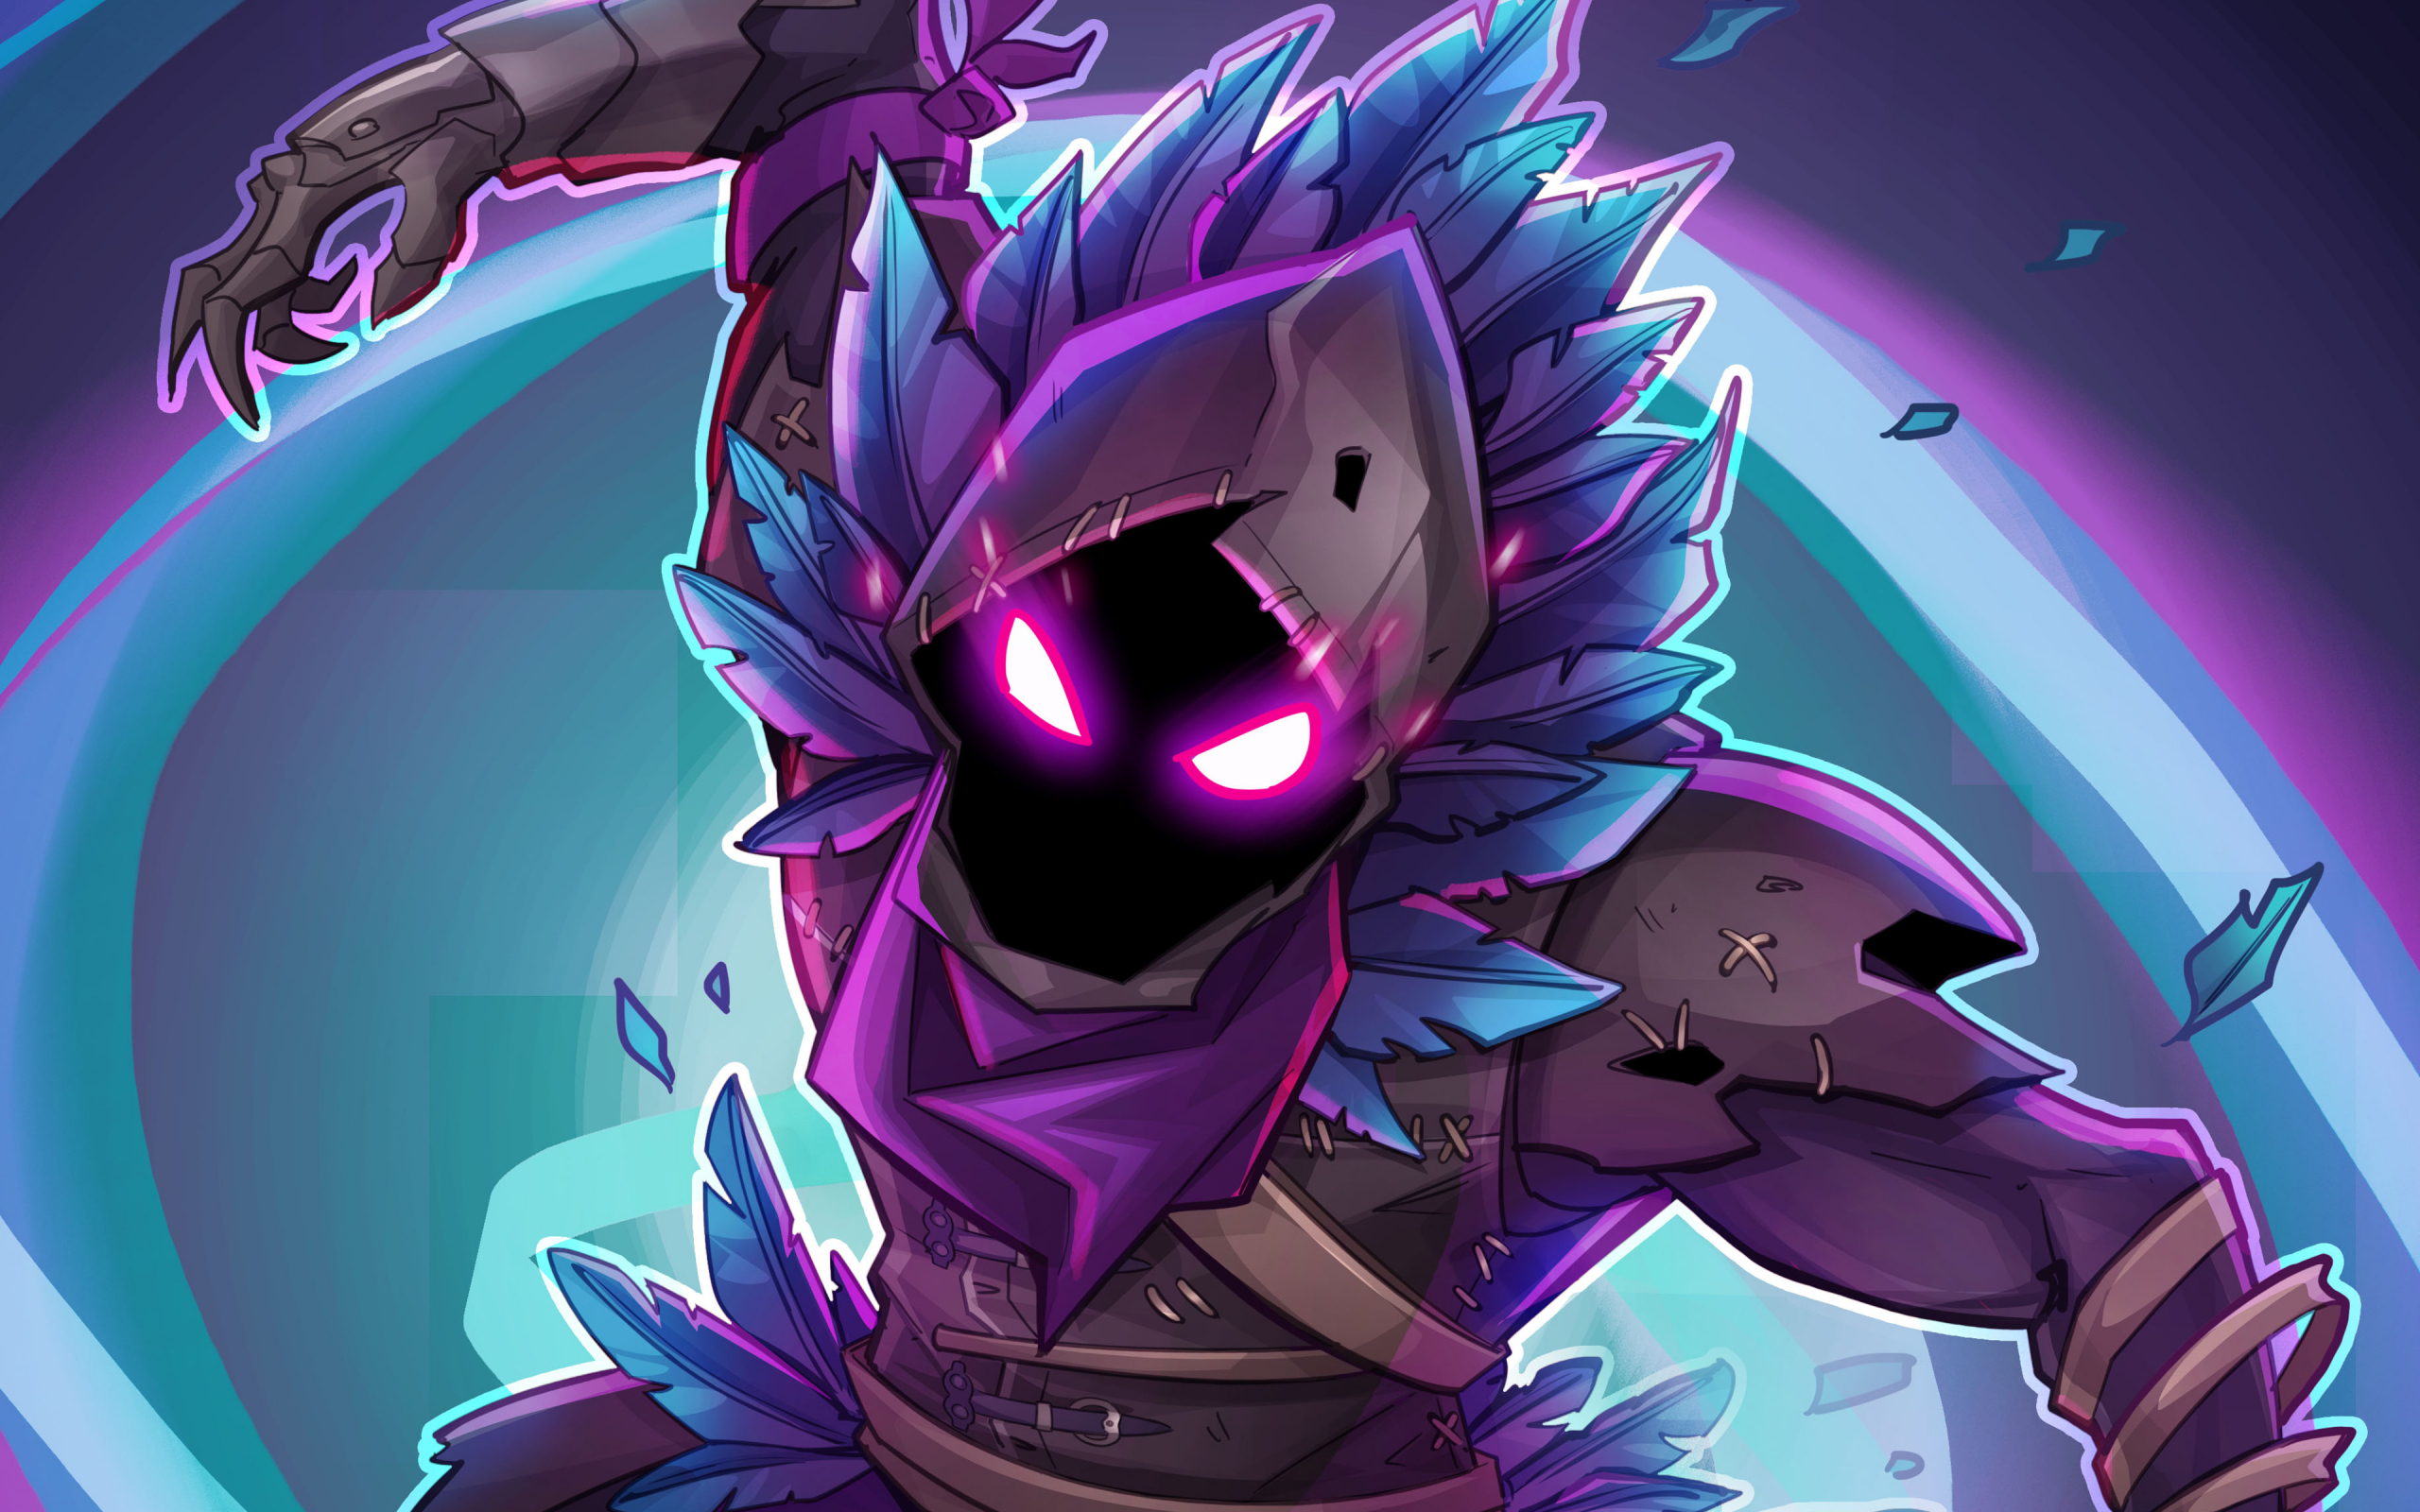 Download 2560x1600 Wallpaper Raven Fortnite Battle Royale Creature Game Dual Wide Widescreen 16 10 Widescreen 2560x1600 Hd Image Background 8126